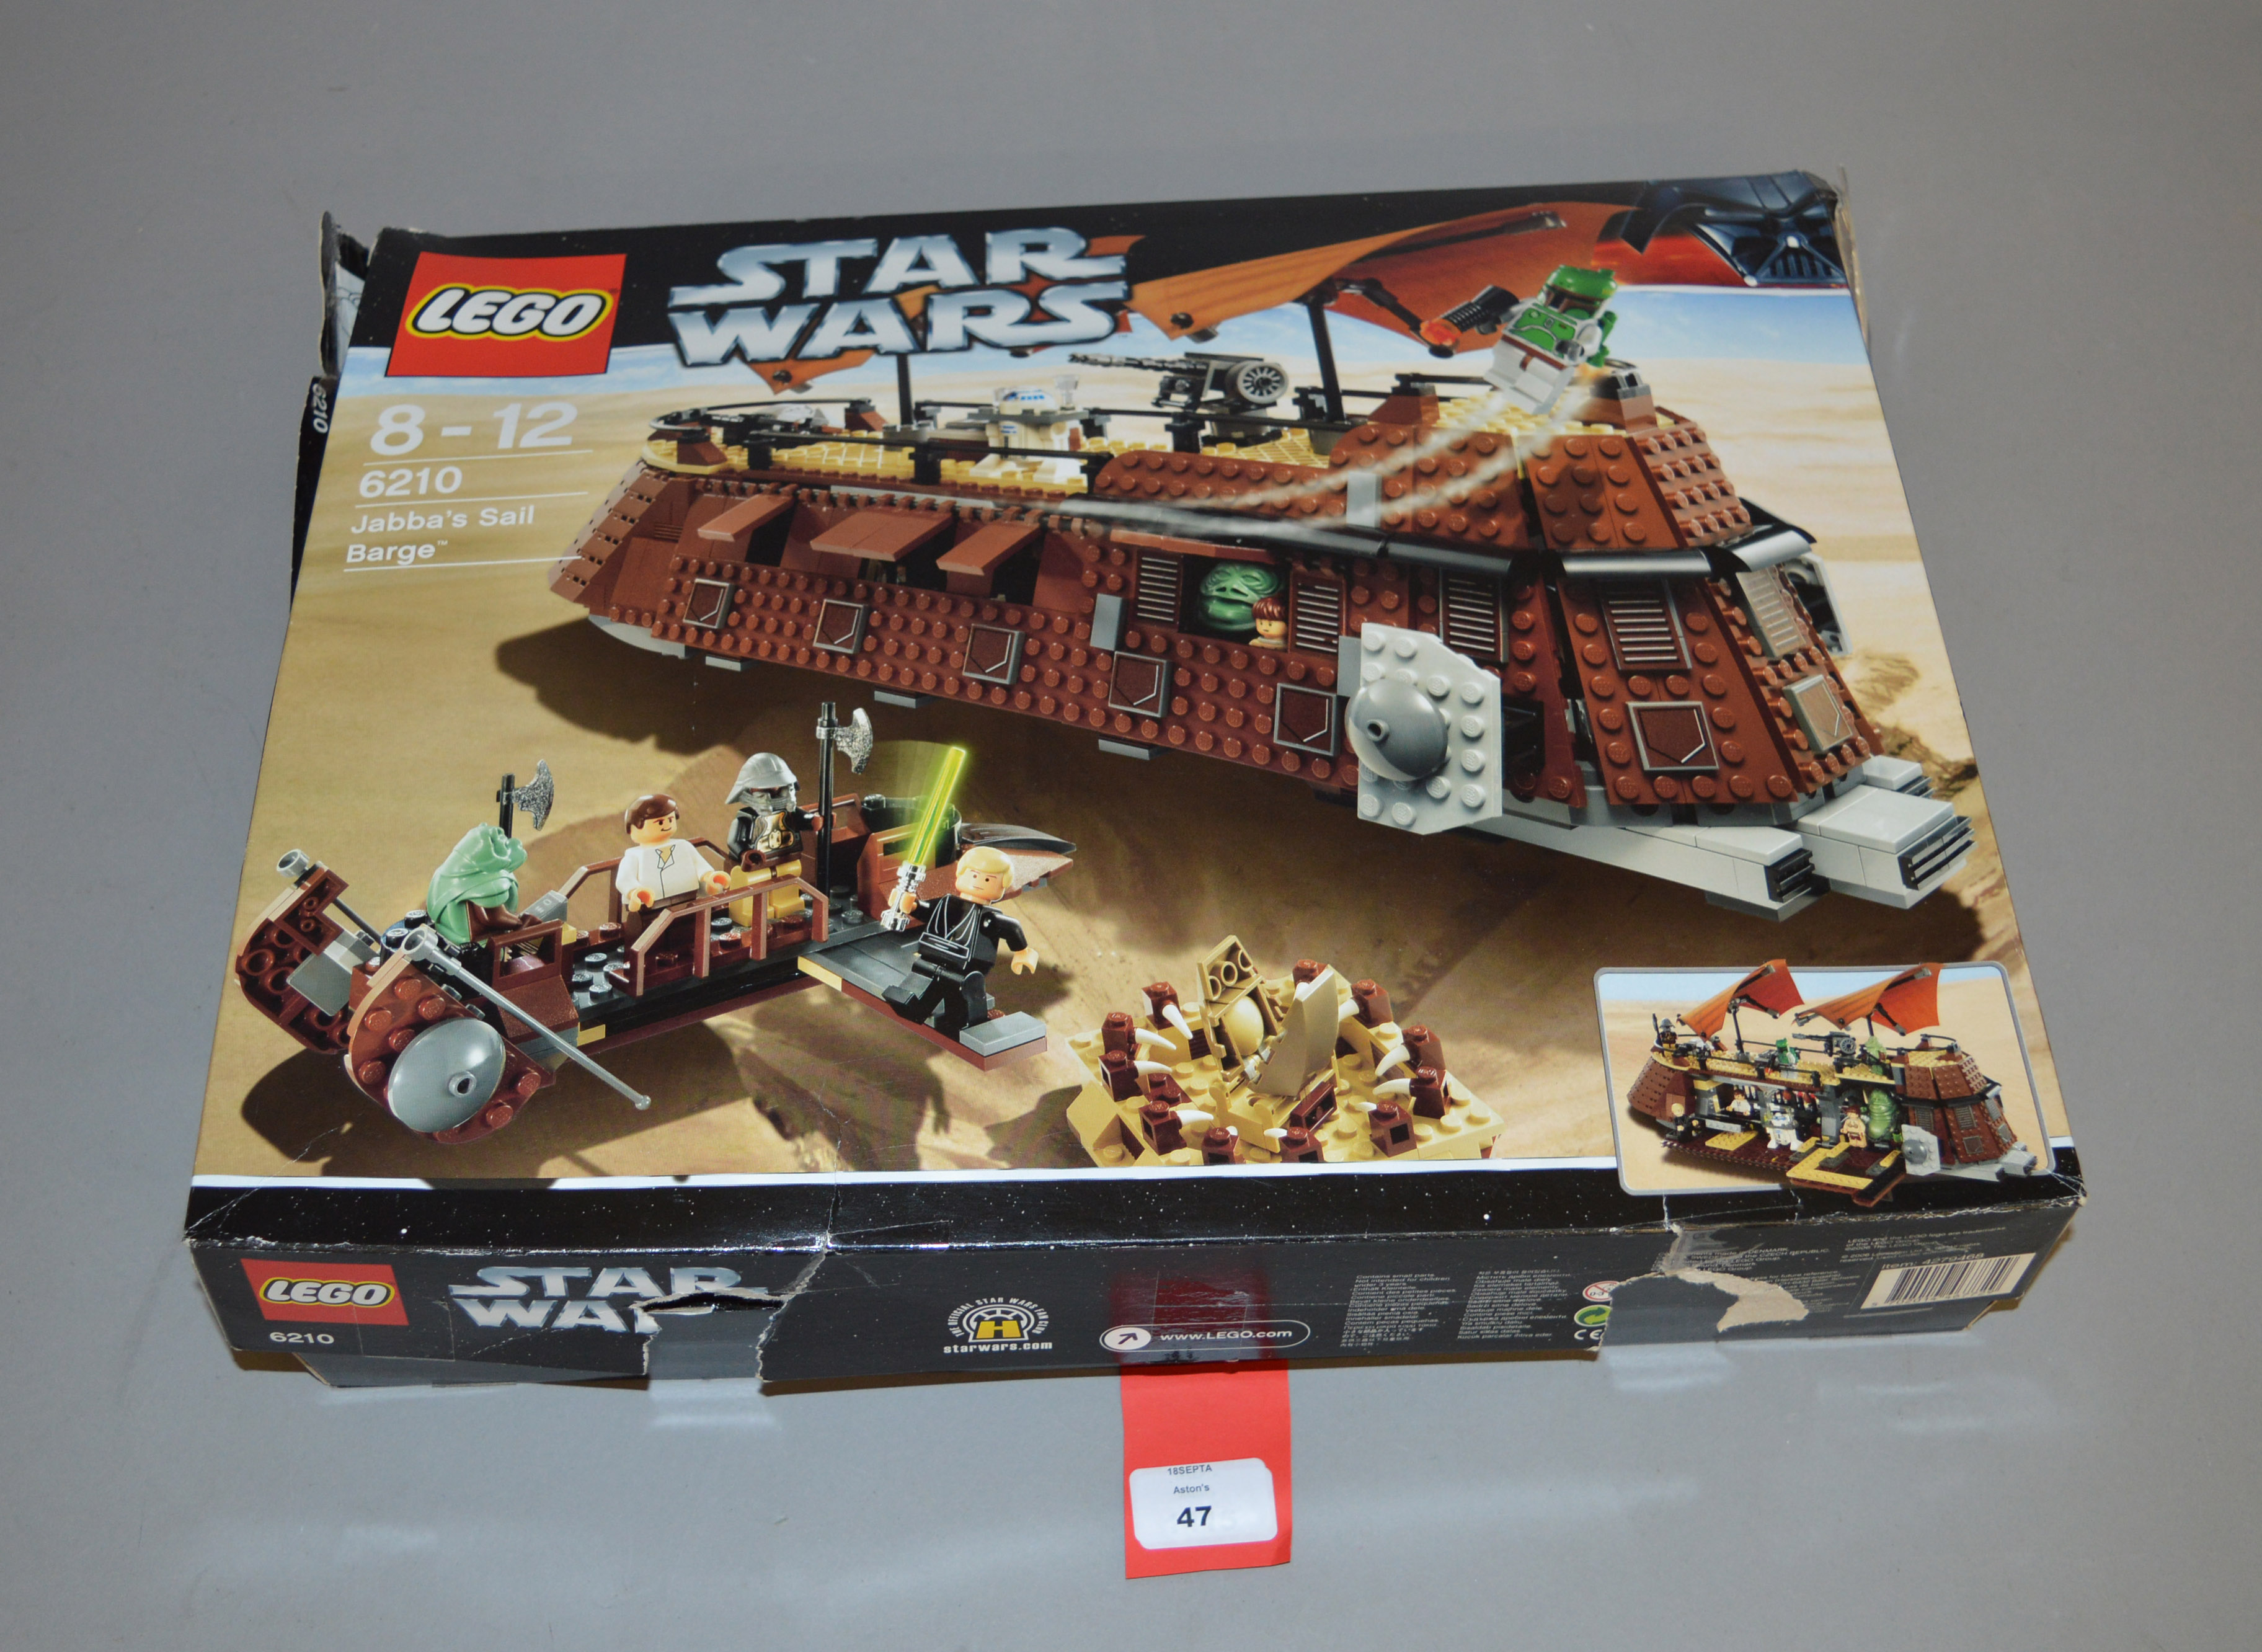 Lego Star Wars 6210 Jabba's Sail Barge. In F-G box, not checked for completeness.